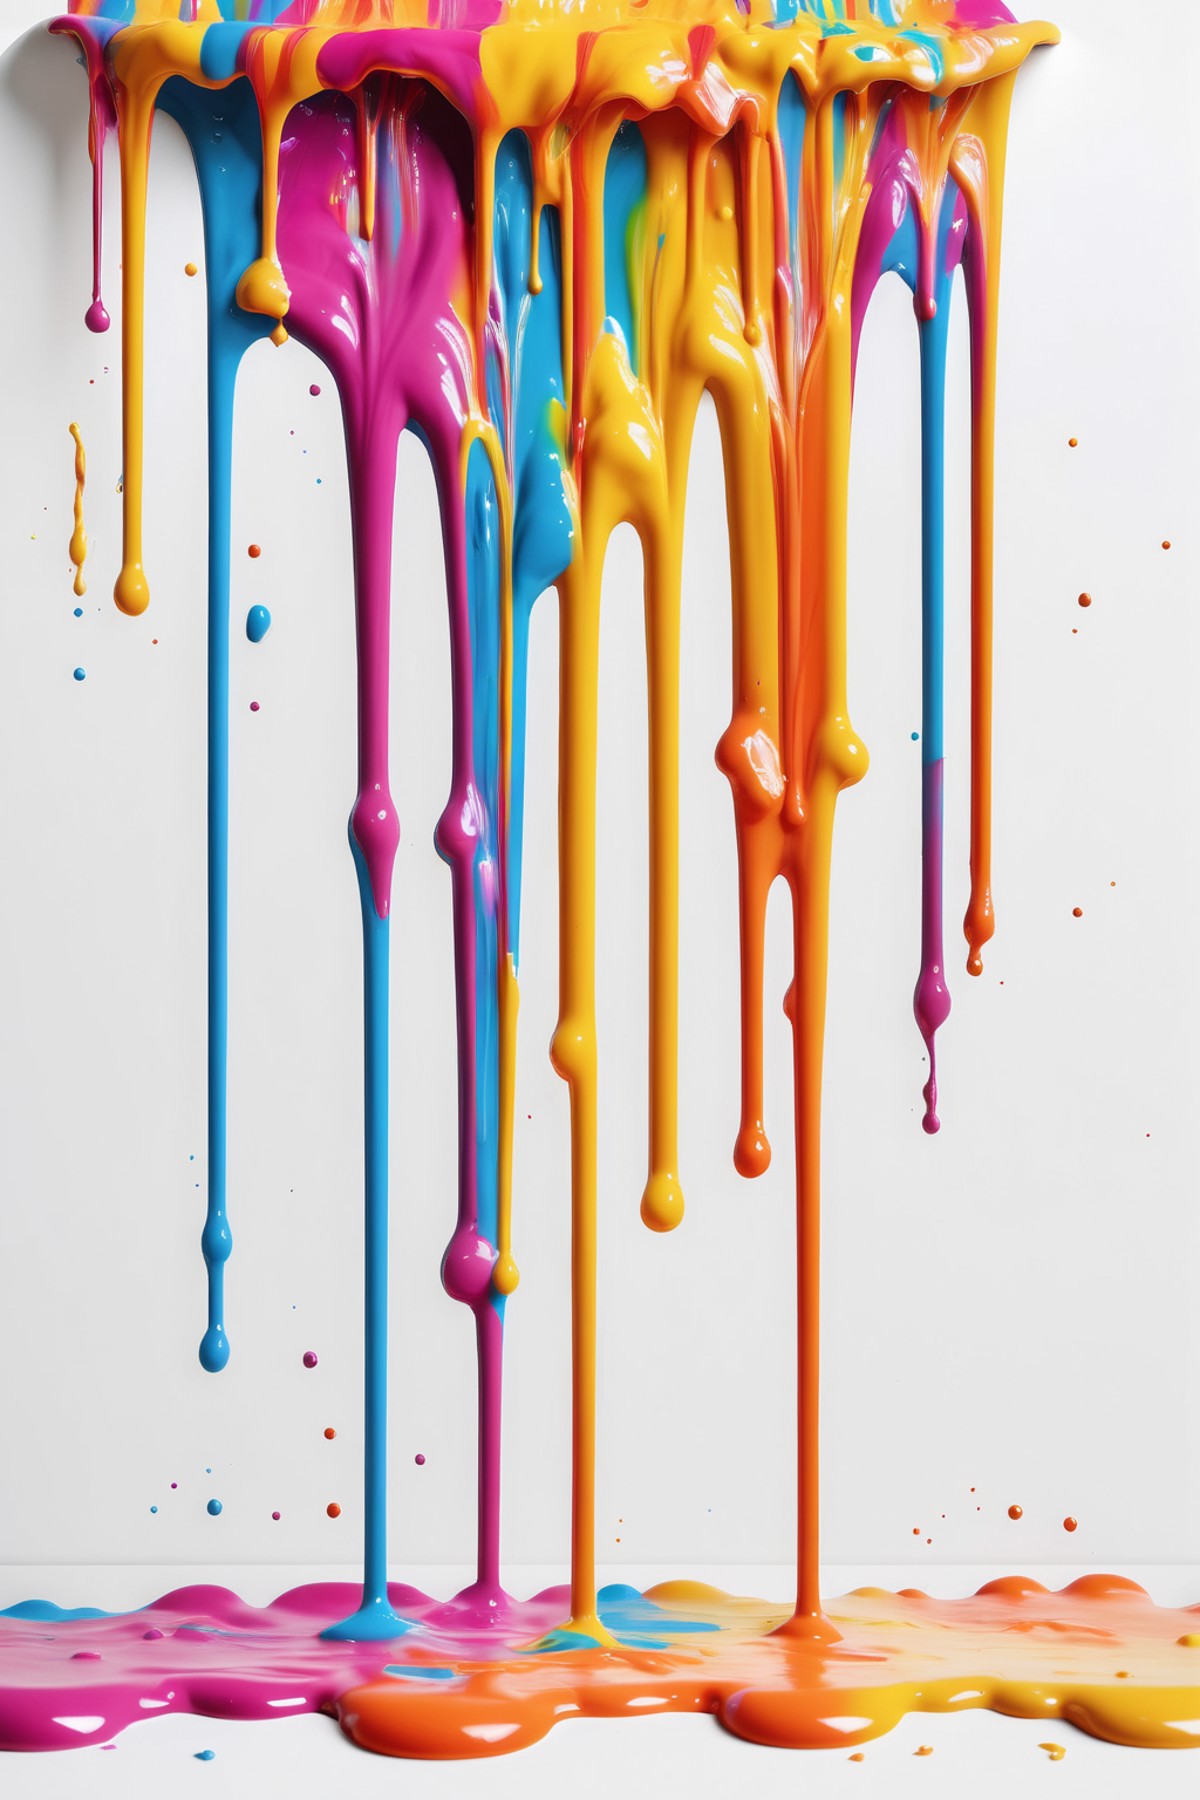 <lora:Dripping Art:1>Dripping Art - solid white backgound with vibrant colored paint dripping down from the top of the image